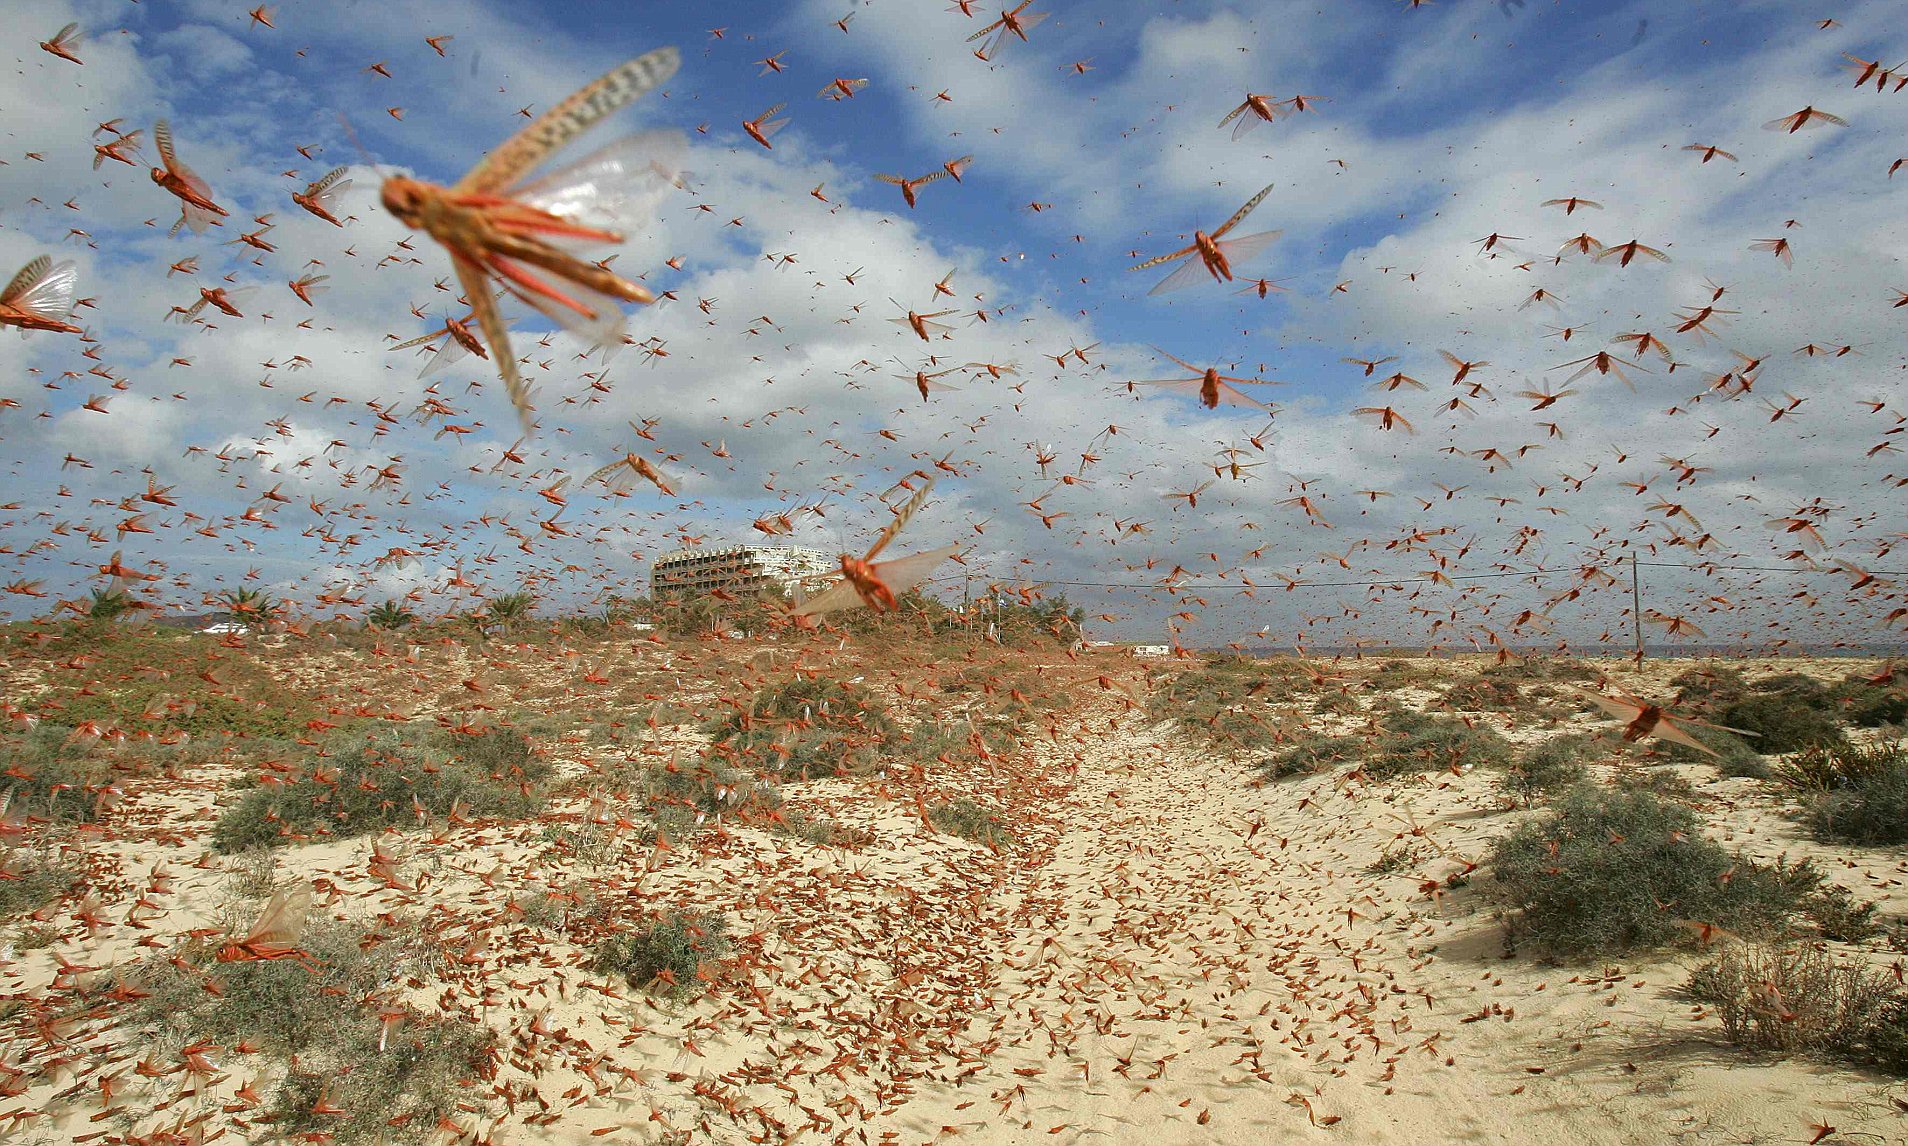 why do bugs and insects form swarms and clouds in the summer